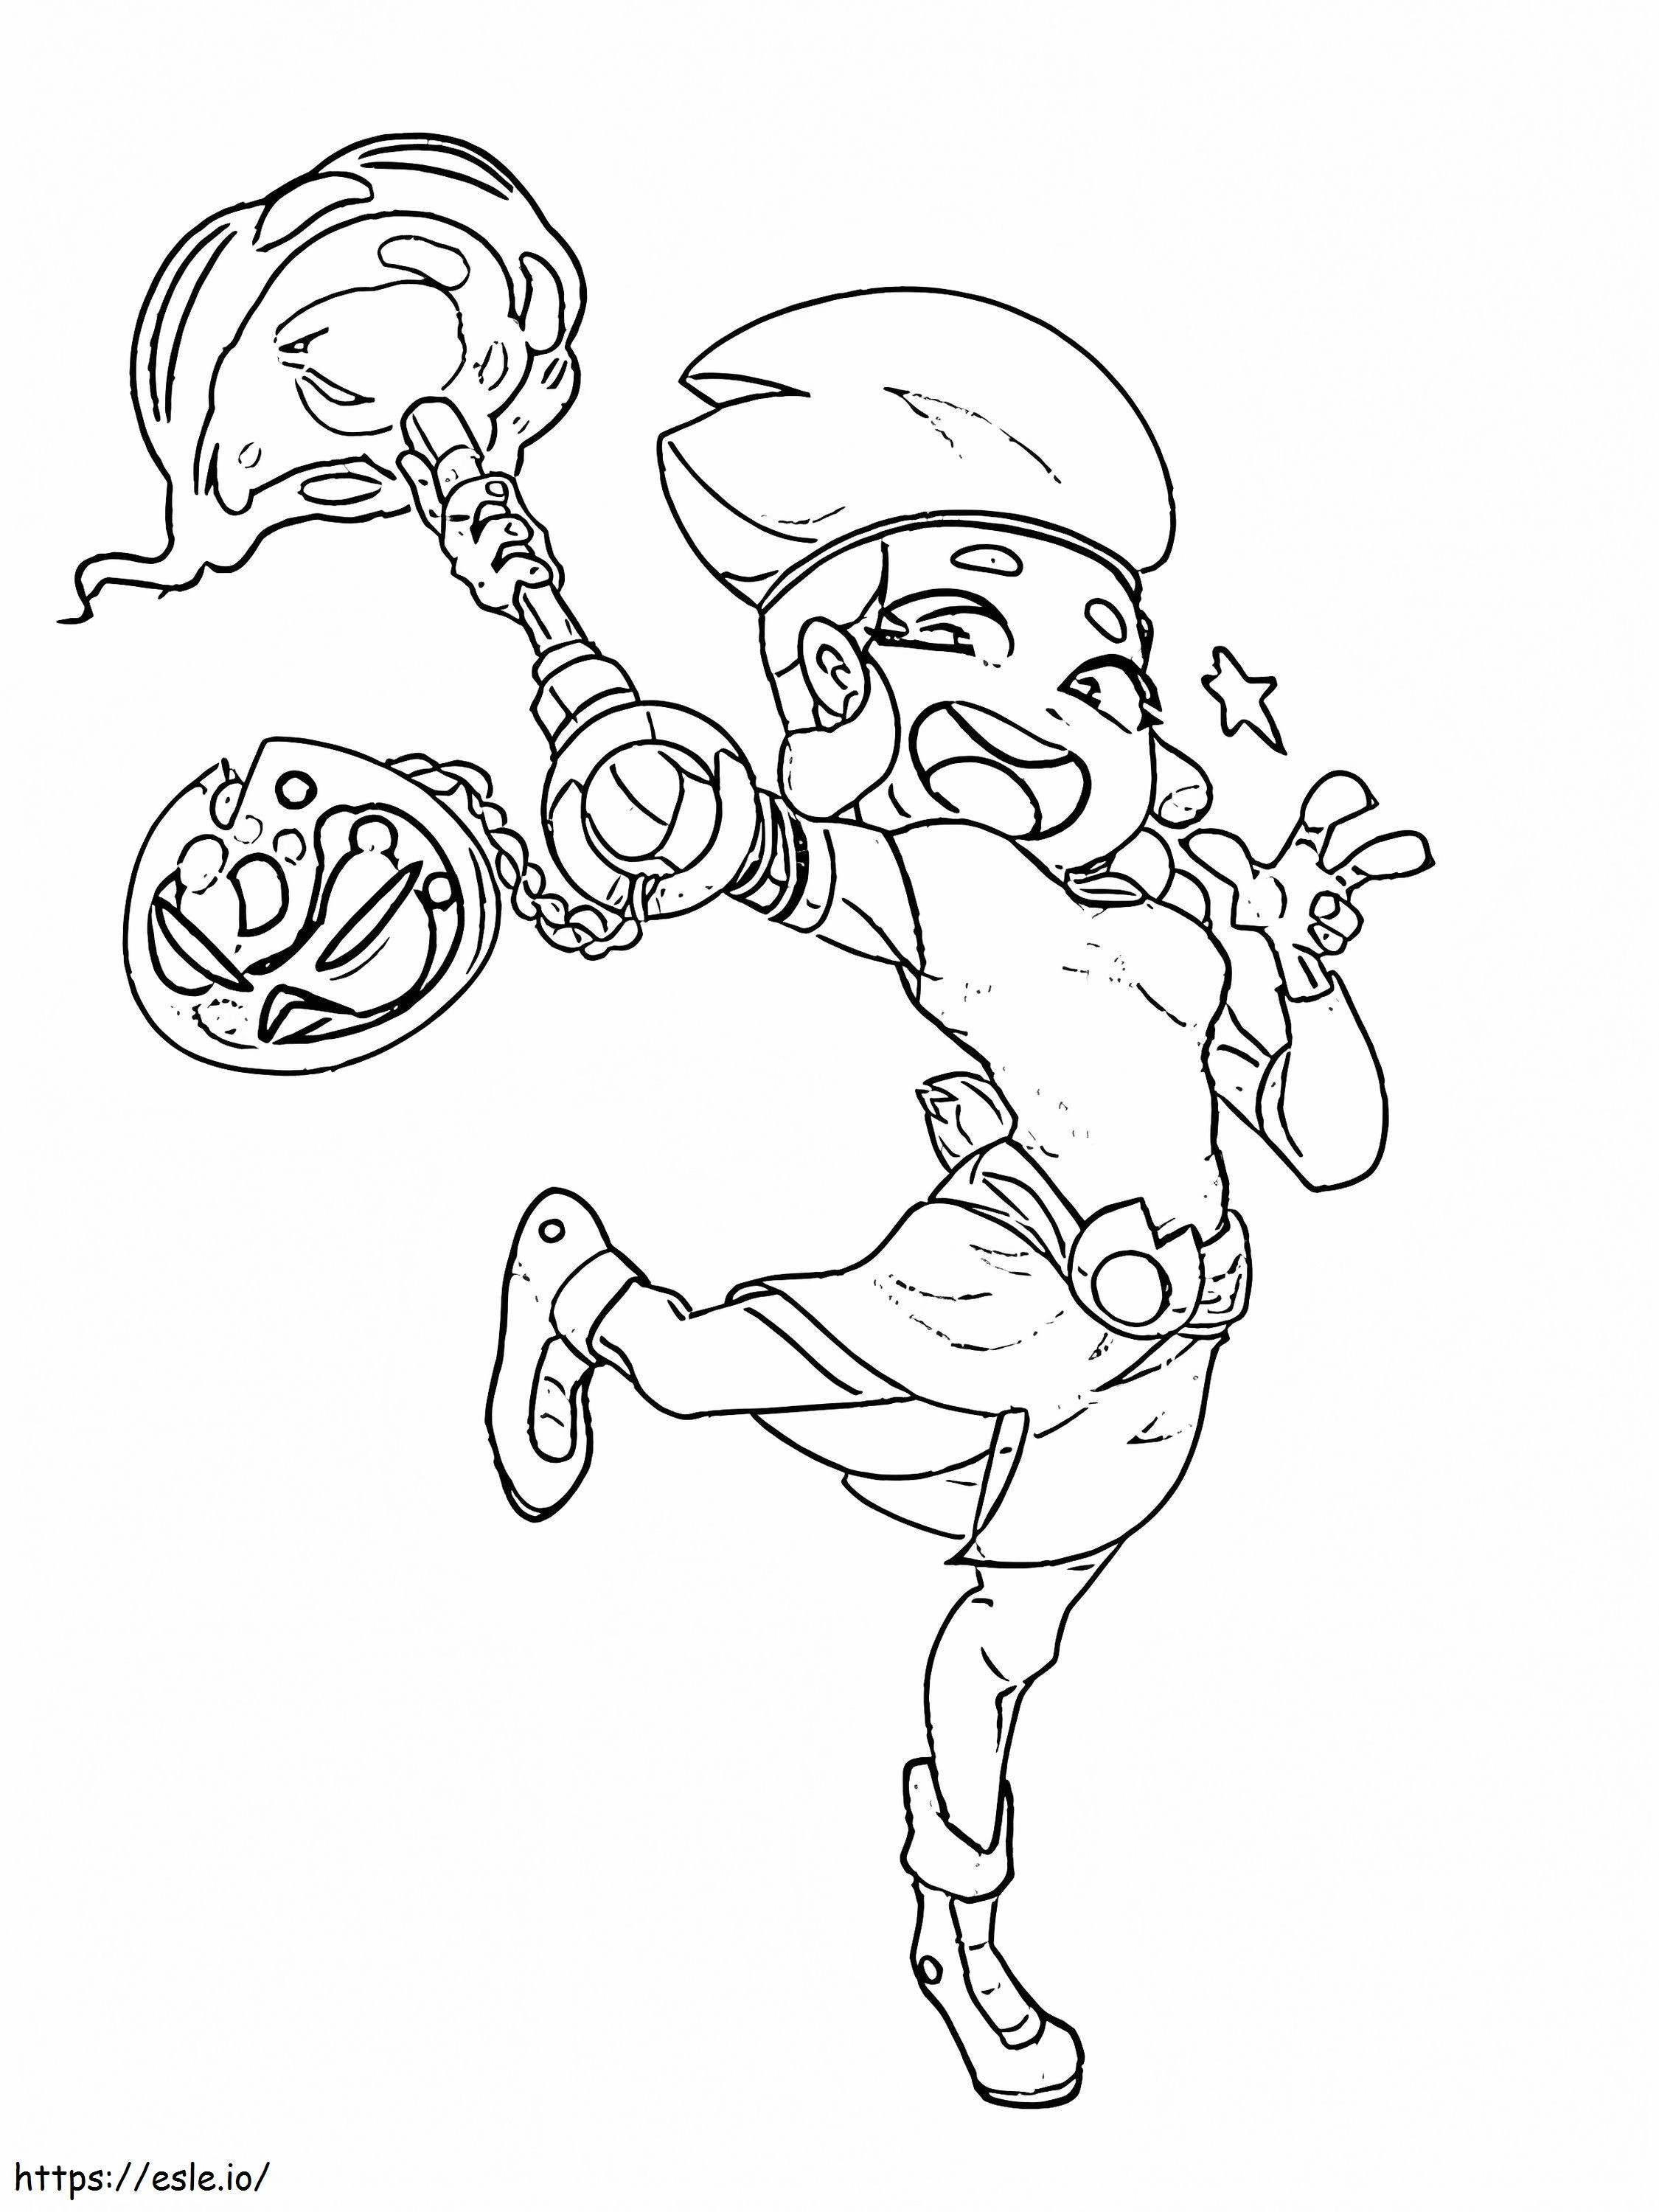 Funny Amber Brawl Stars coloring page